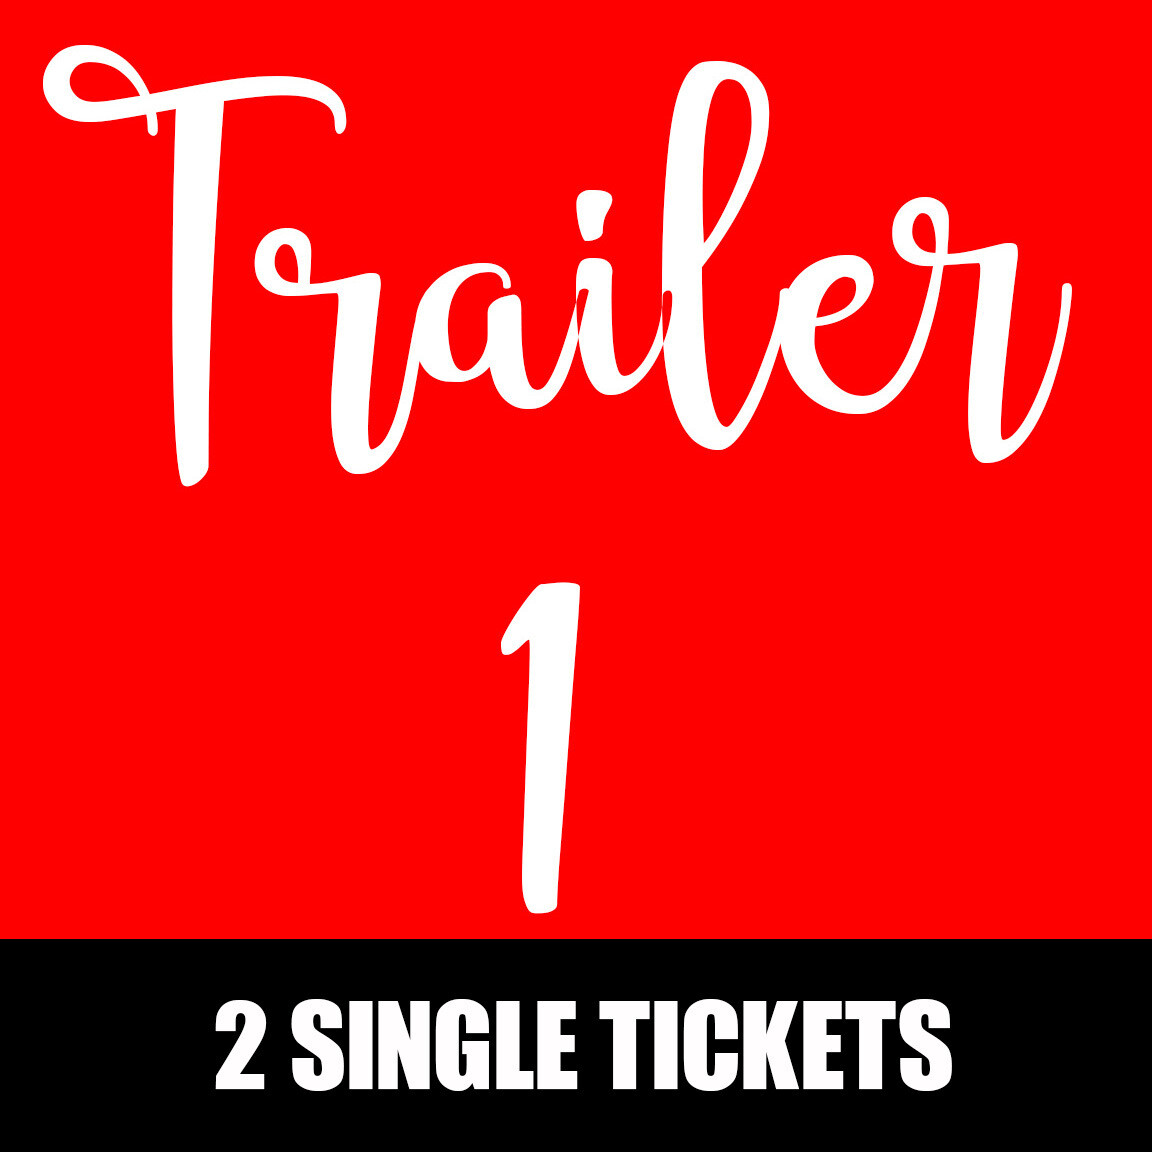 Trailer 1 - December 10th @ 10pm - Two Single Tickets